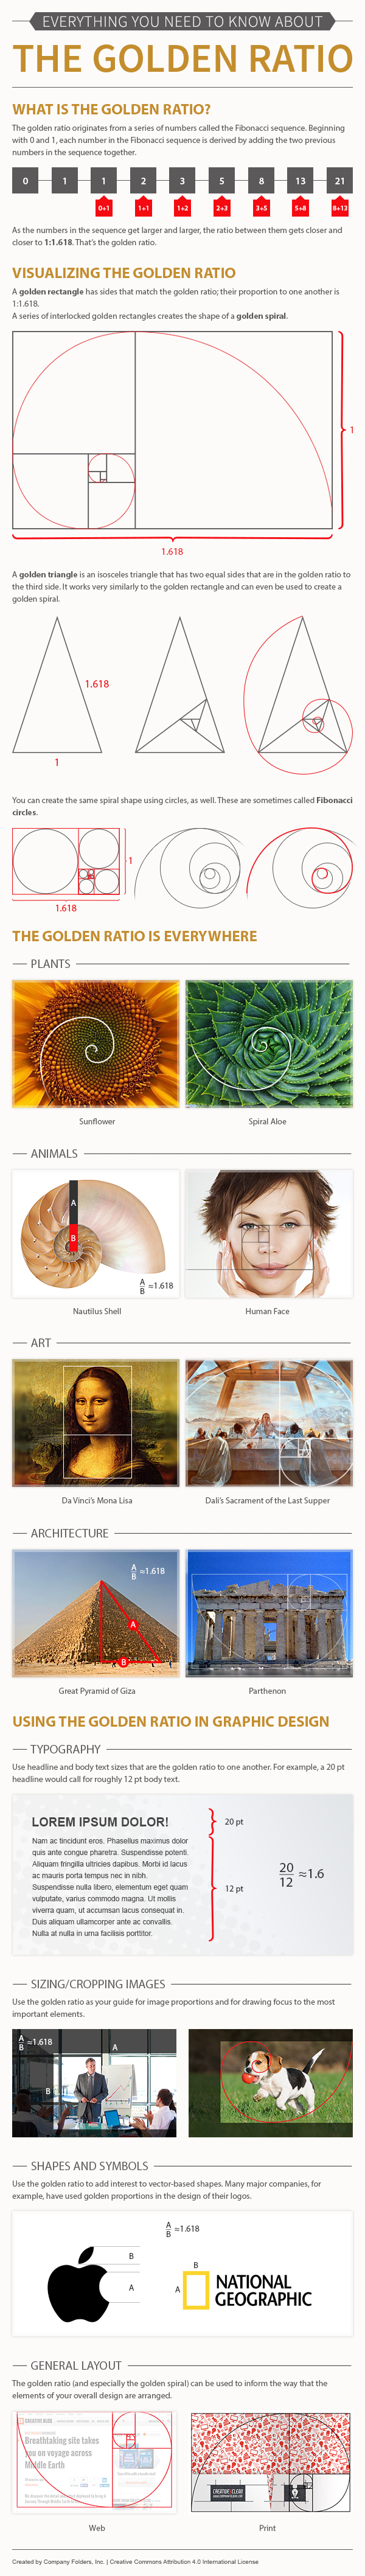 Everything You Need to Know About the Golden Ratio - Infographic